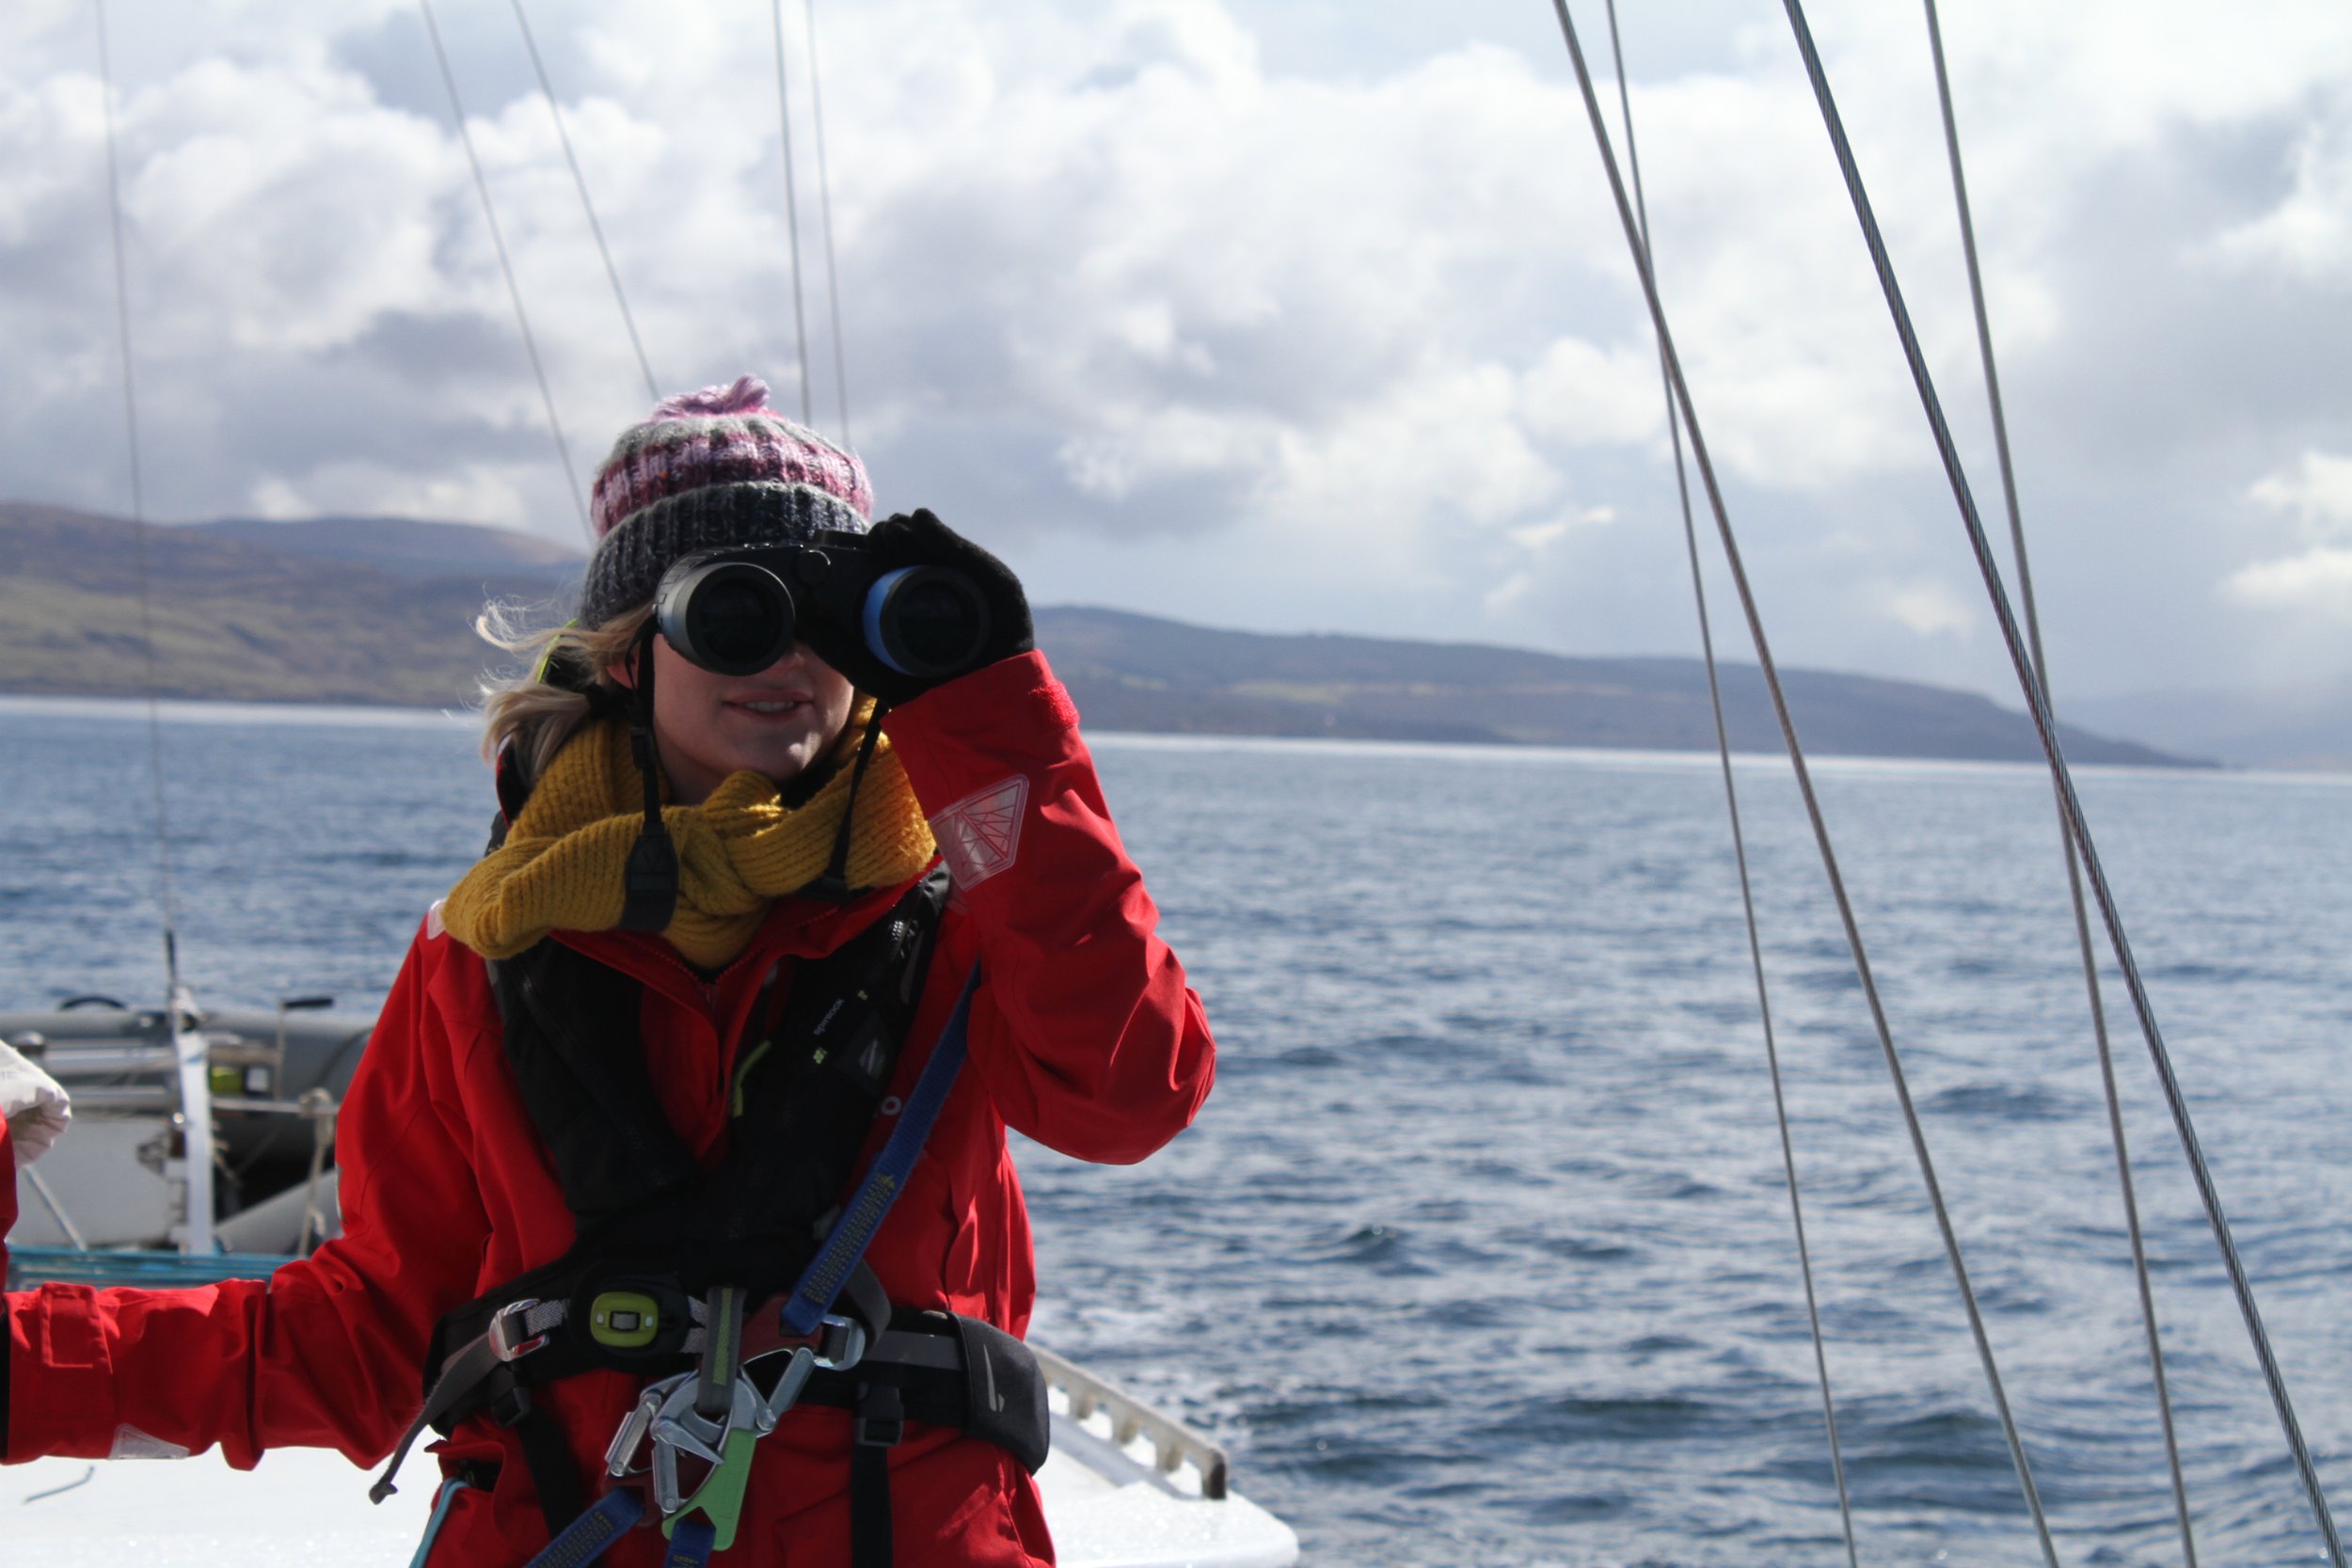  Visual data is collected at the mast by the citizen scientists who participate in expeditions.  